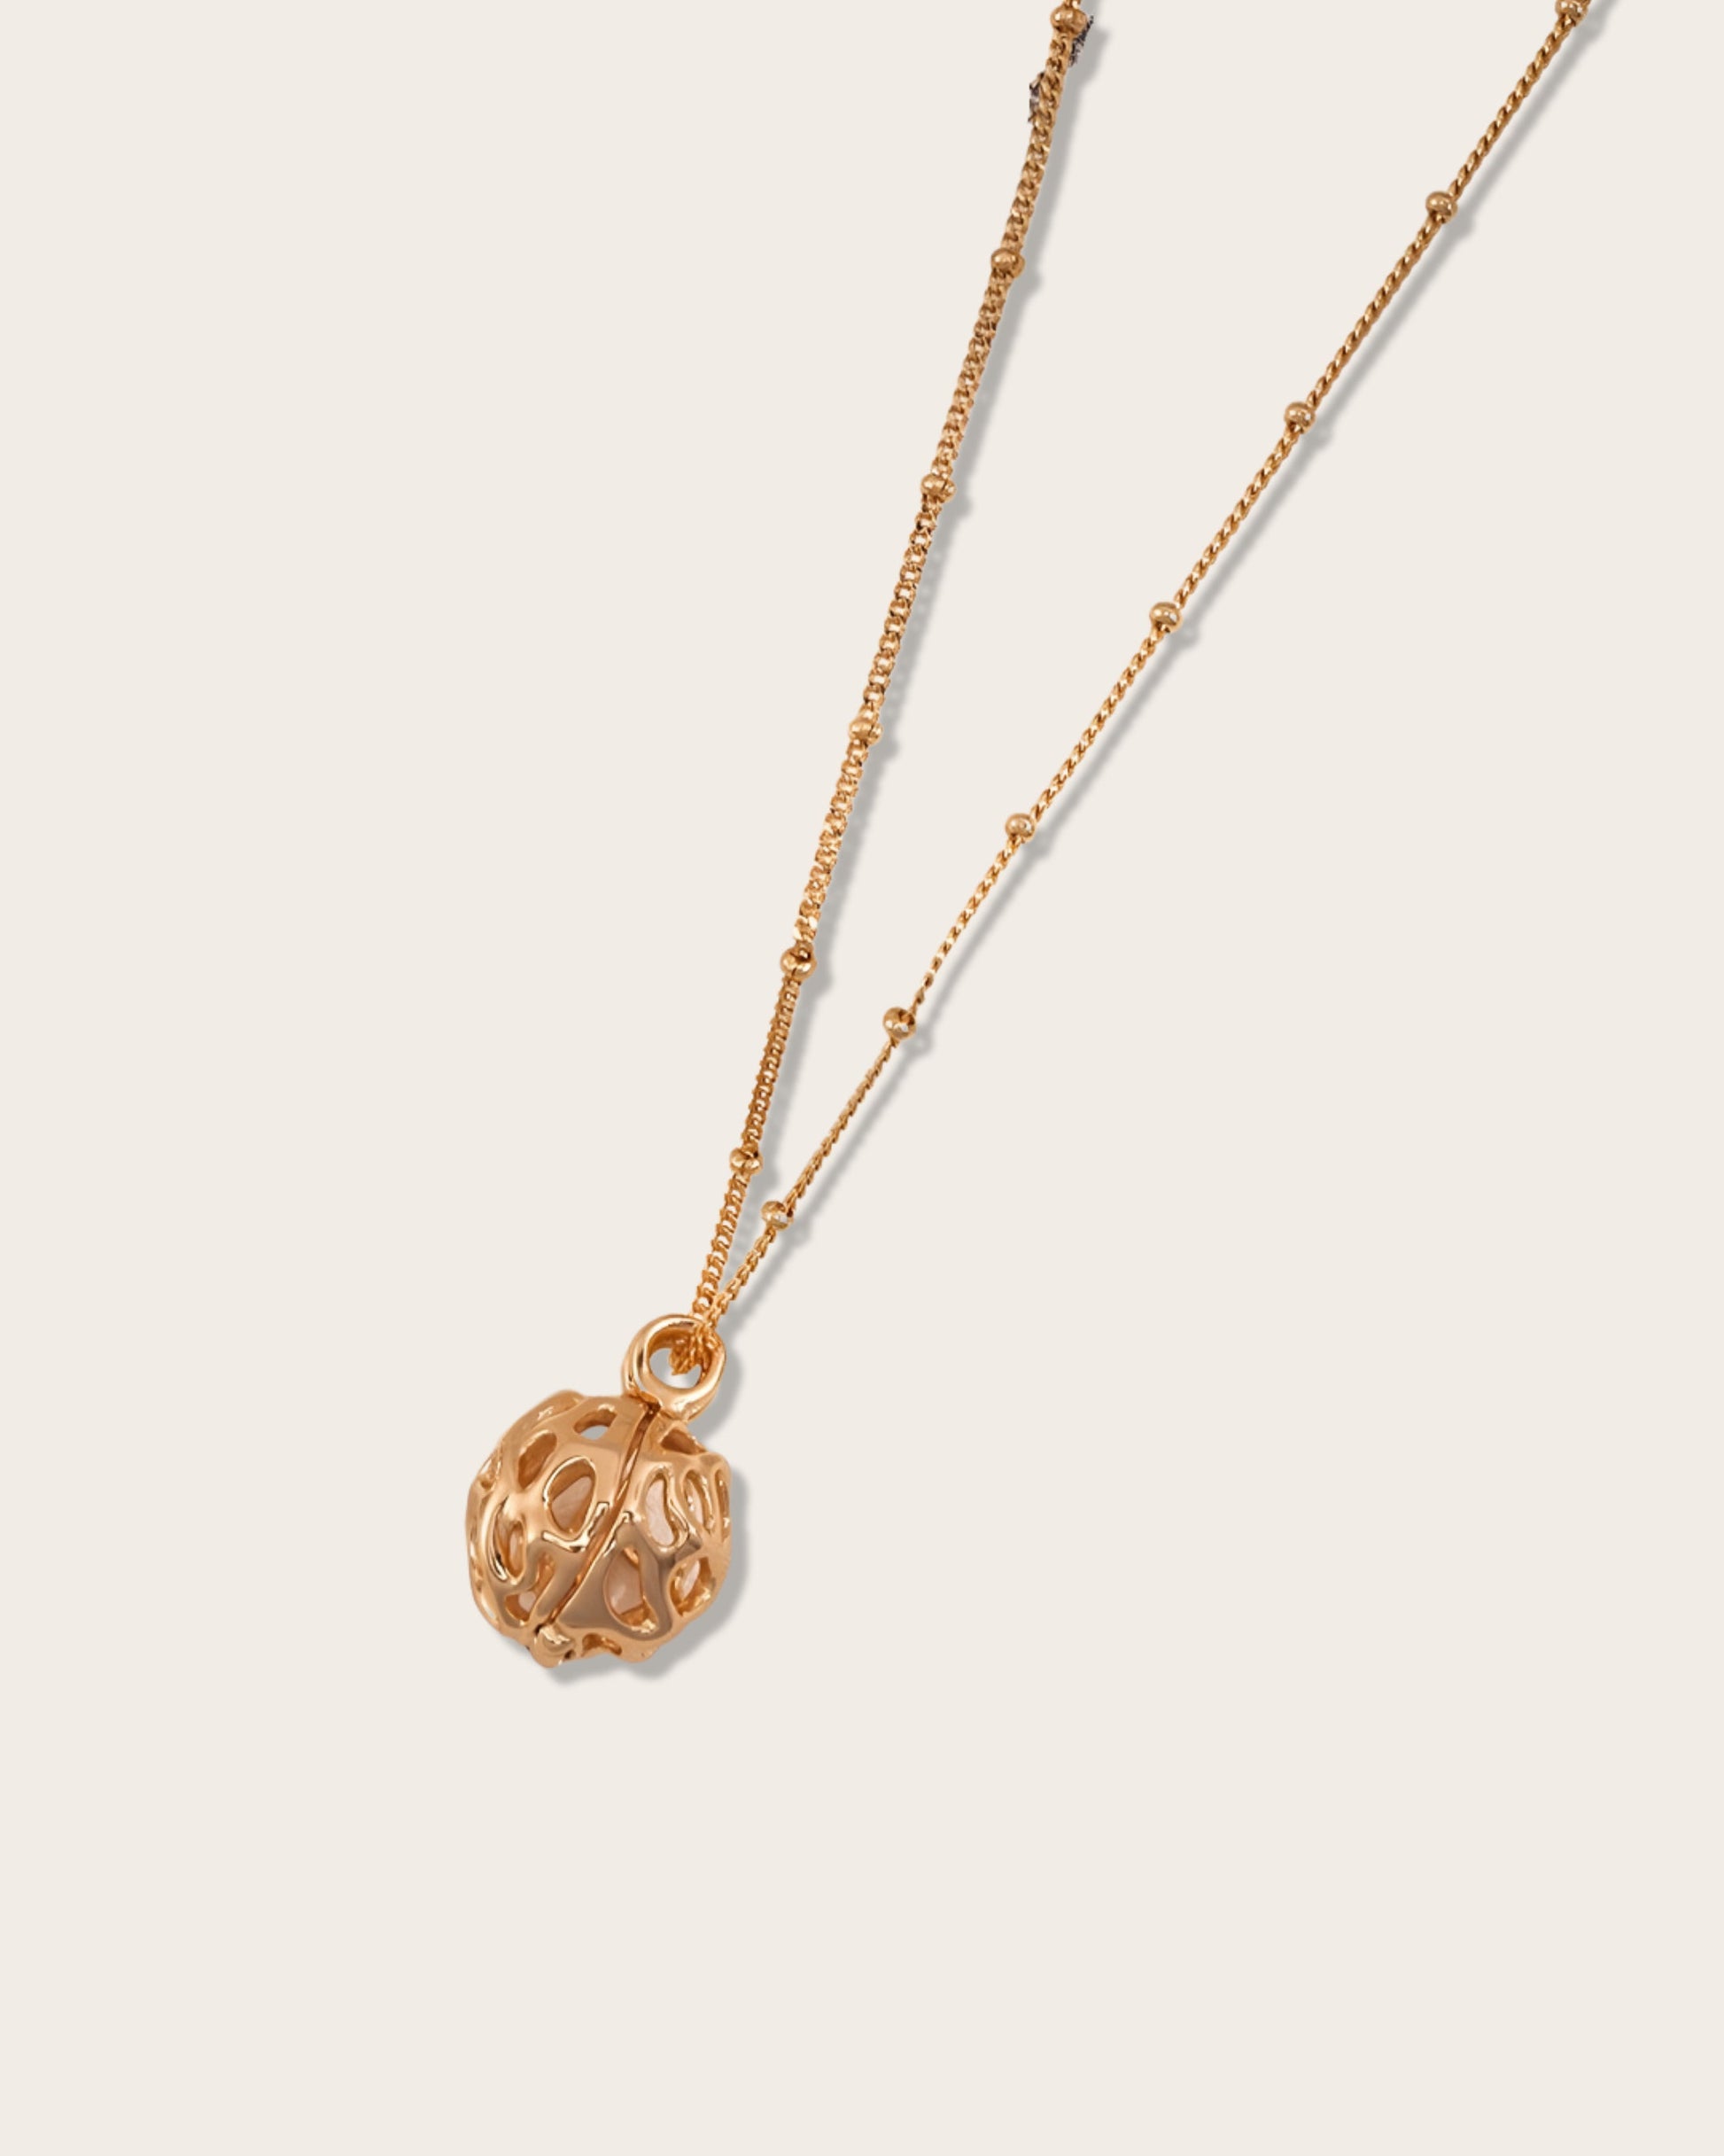 Necklace Embracing the Beauty of Simplicity - S925 Sterling Silver with 18K Gold Vermeil - Elevate your style with these stunning pieces that capture the essence of beauty. Designed to make you shine, these necklaces are a must-have for any occasion.